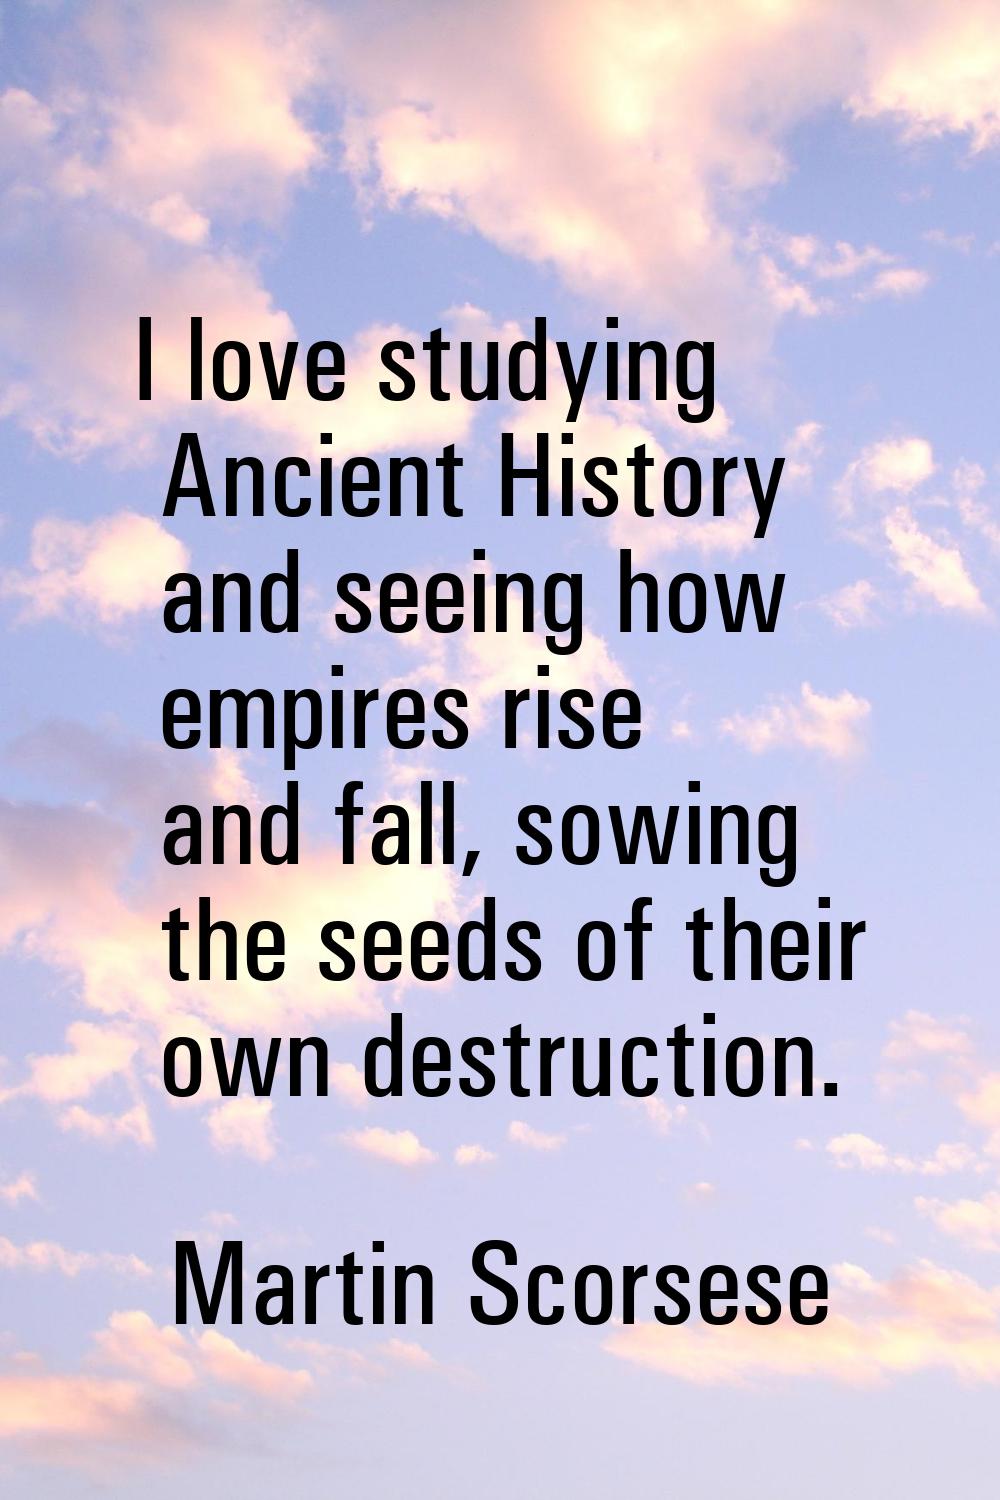 I love studying Ancient History and seeing how empires rise and fall, sowing the seeds of their own